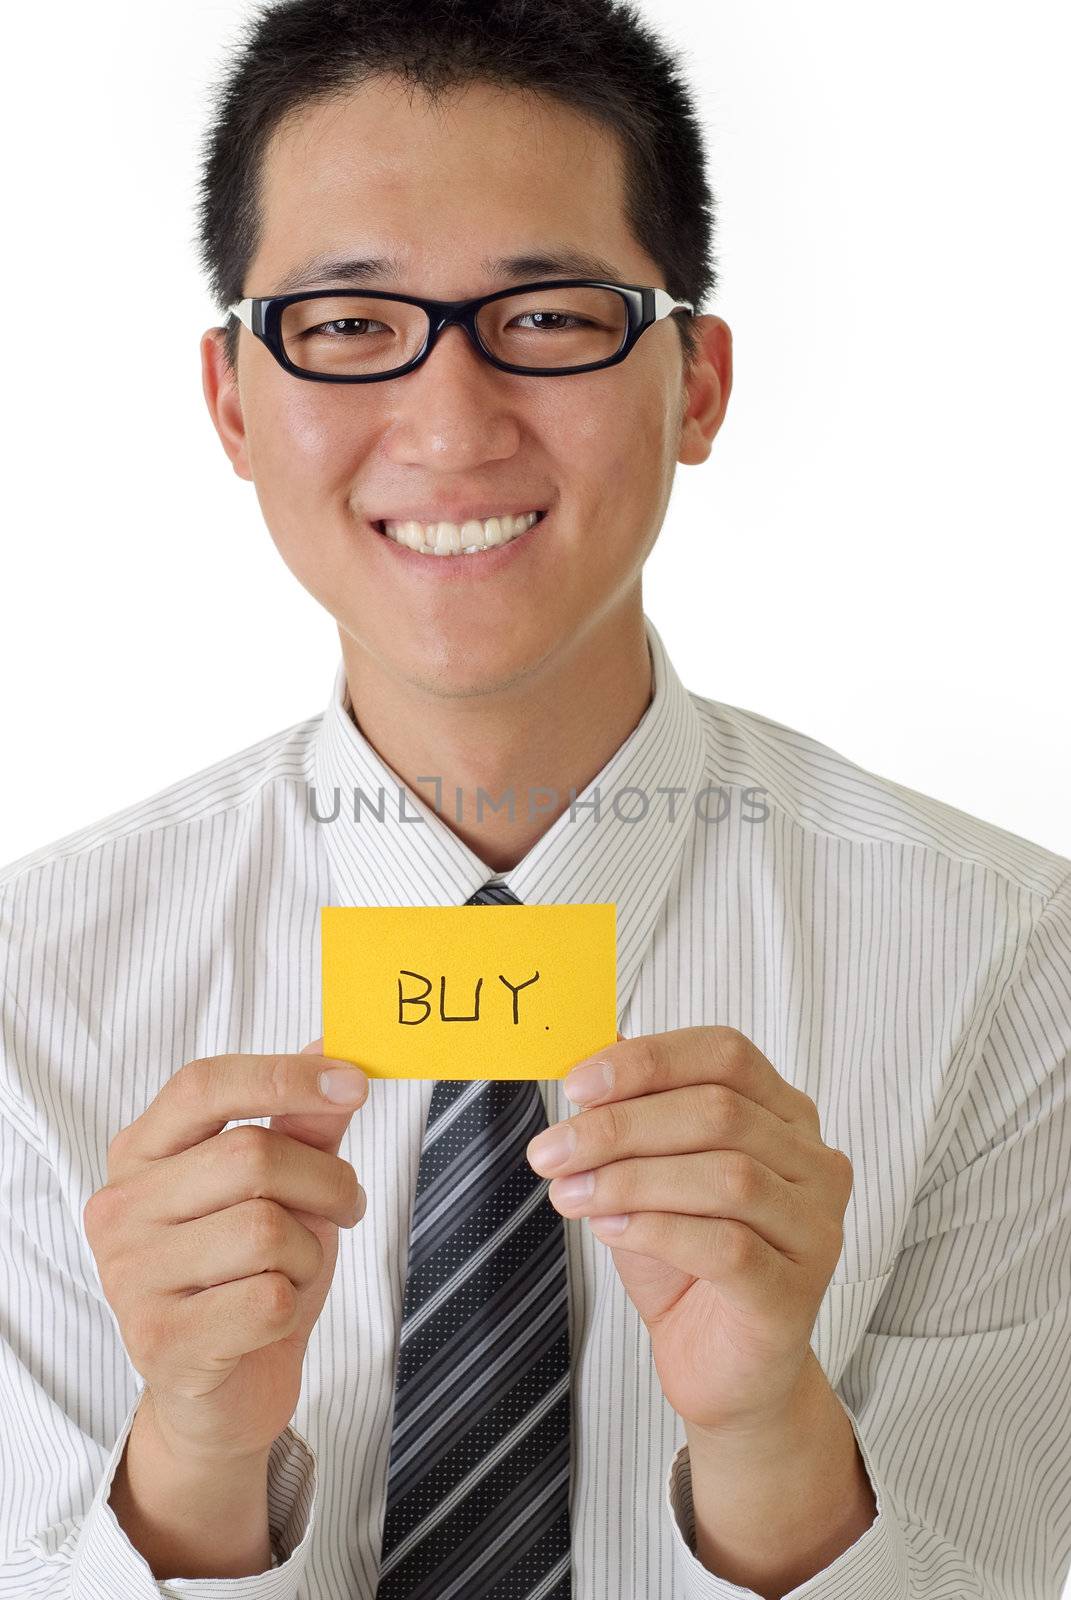 Shopping business man holding card written buy words and smiling.